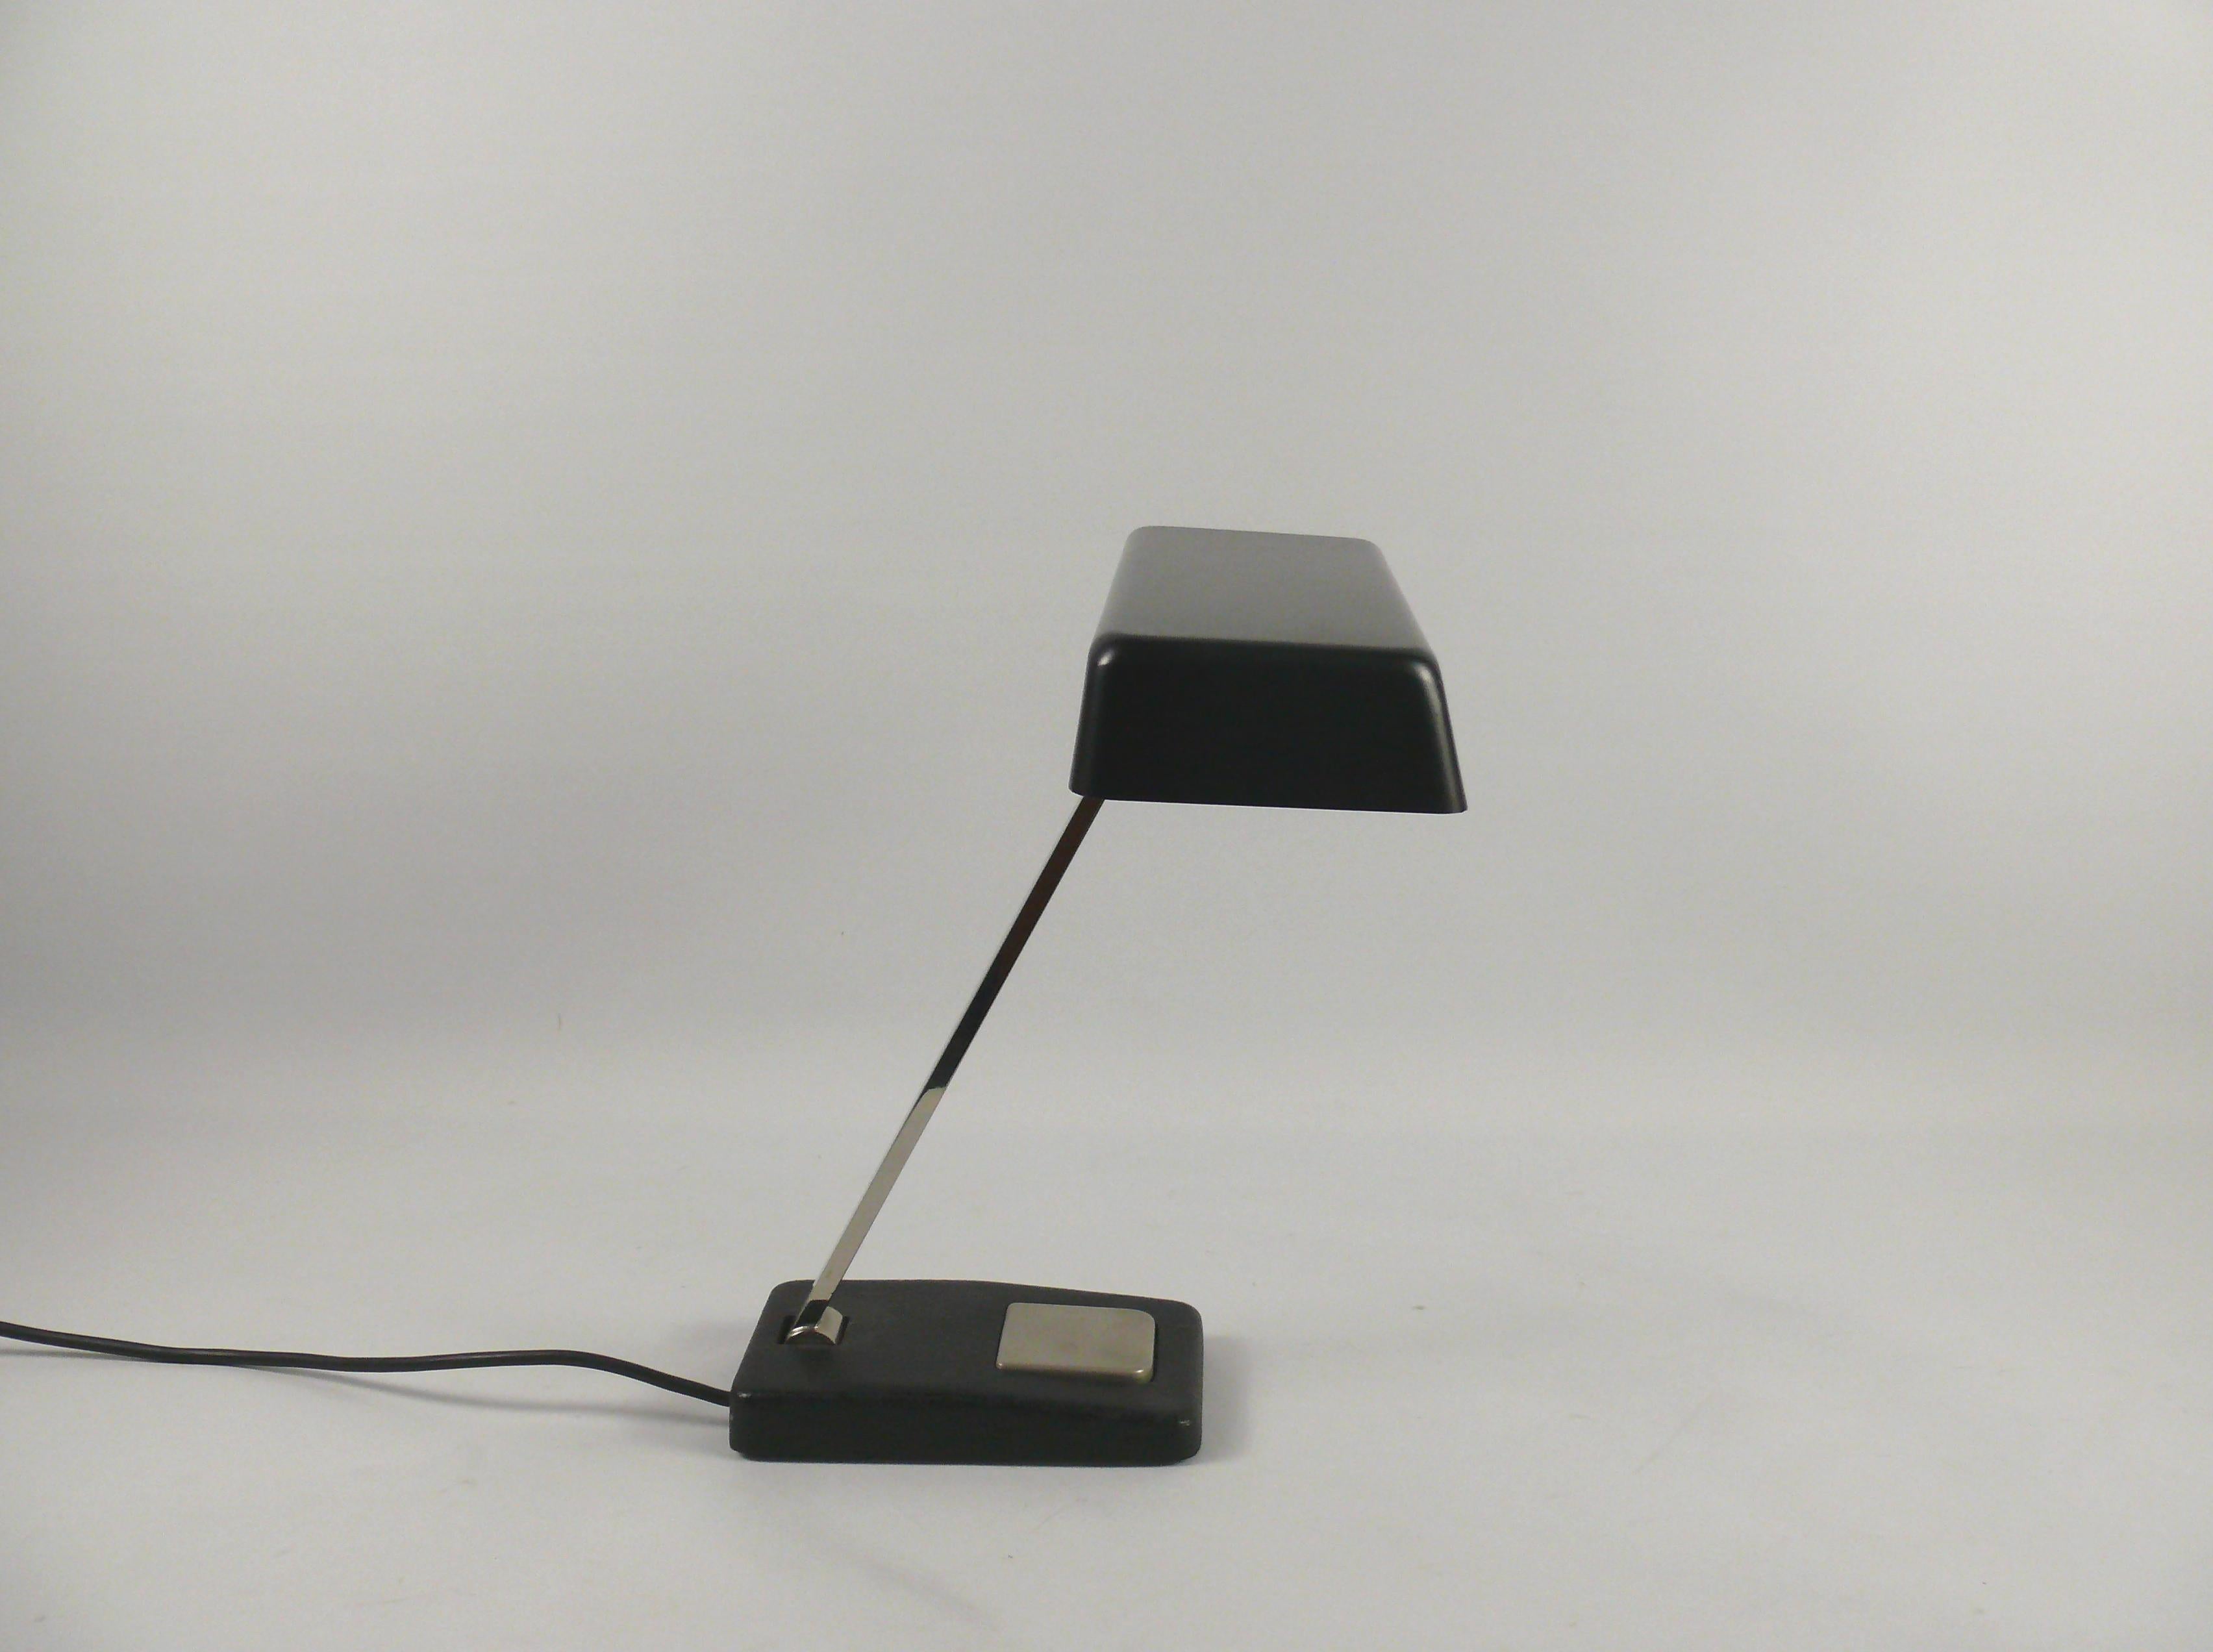 Midcentury Piano Lamp / Table Lamp, made by Hillebrand - Germany, 1960s In Excellent Condition For Sale In Schwerin, MV